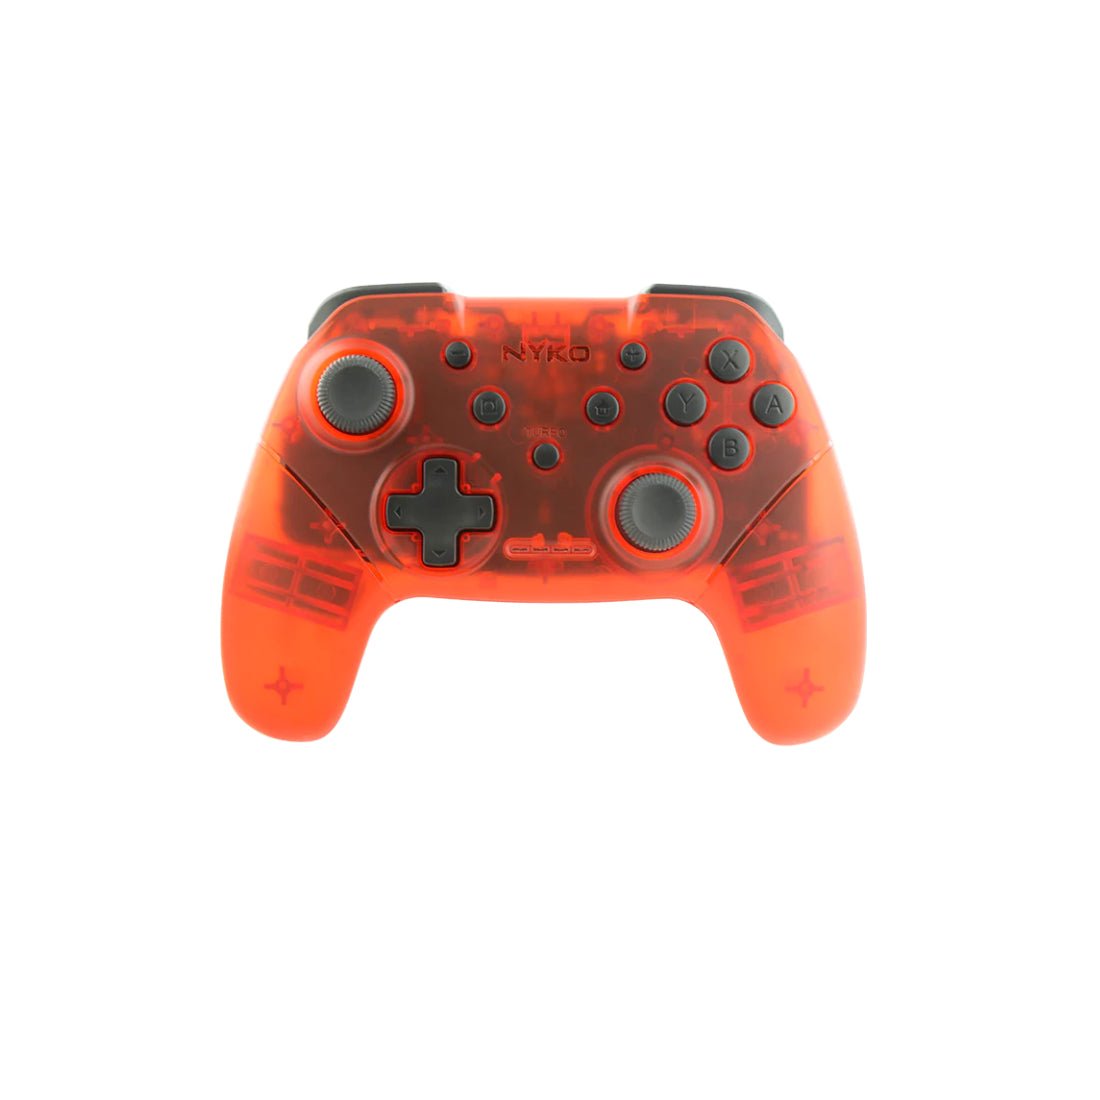 Nyko Wireless Core Controller for Nintendo Switch - Red - Store 974 | ستور ٩٧٤